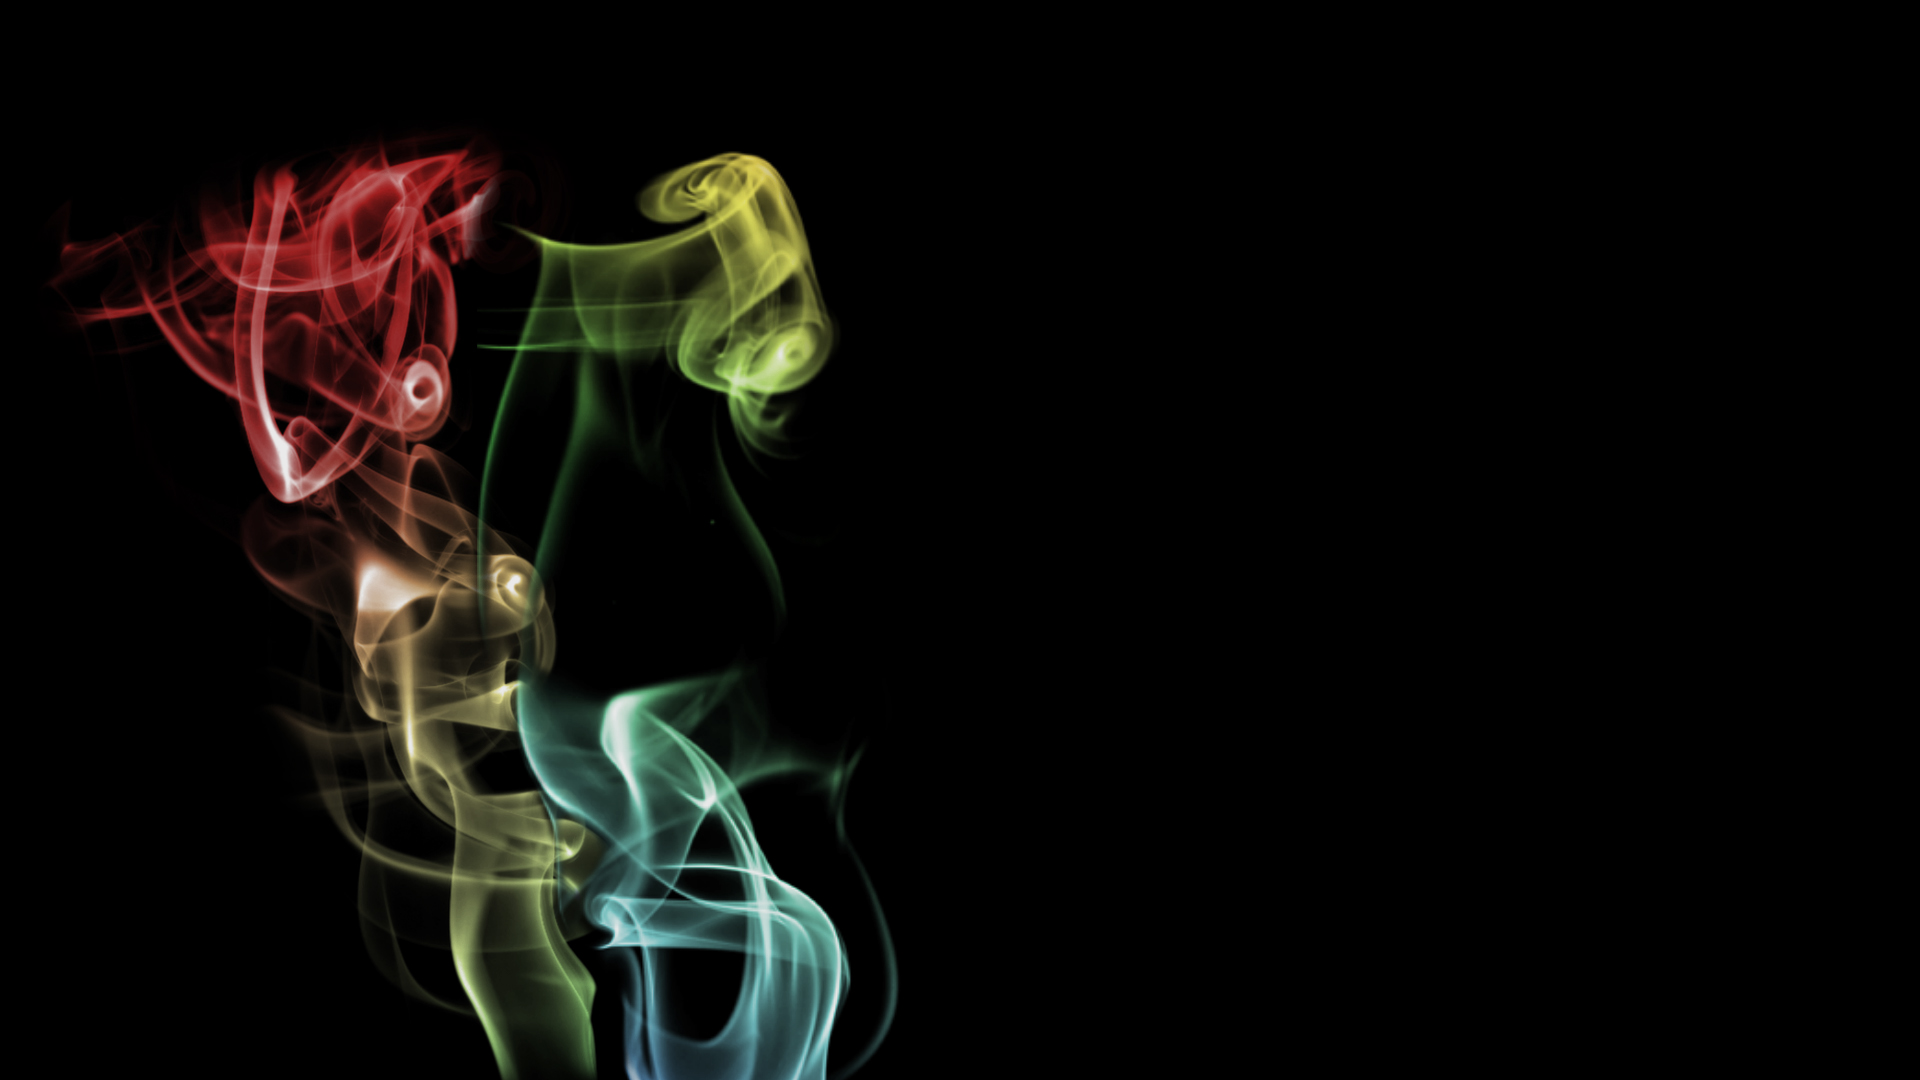 File Name Cool Smoke Wallpaper By Ernie Cate On Fl 3d HDq